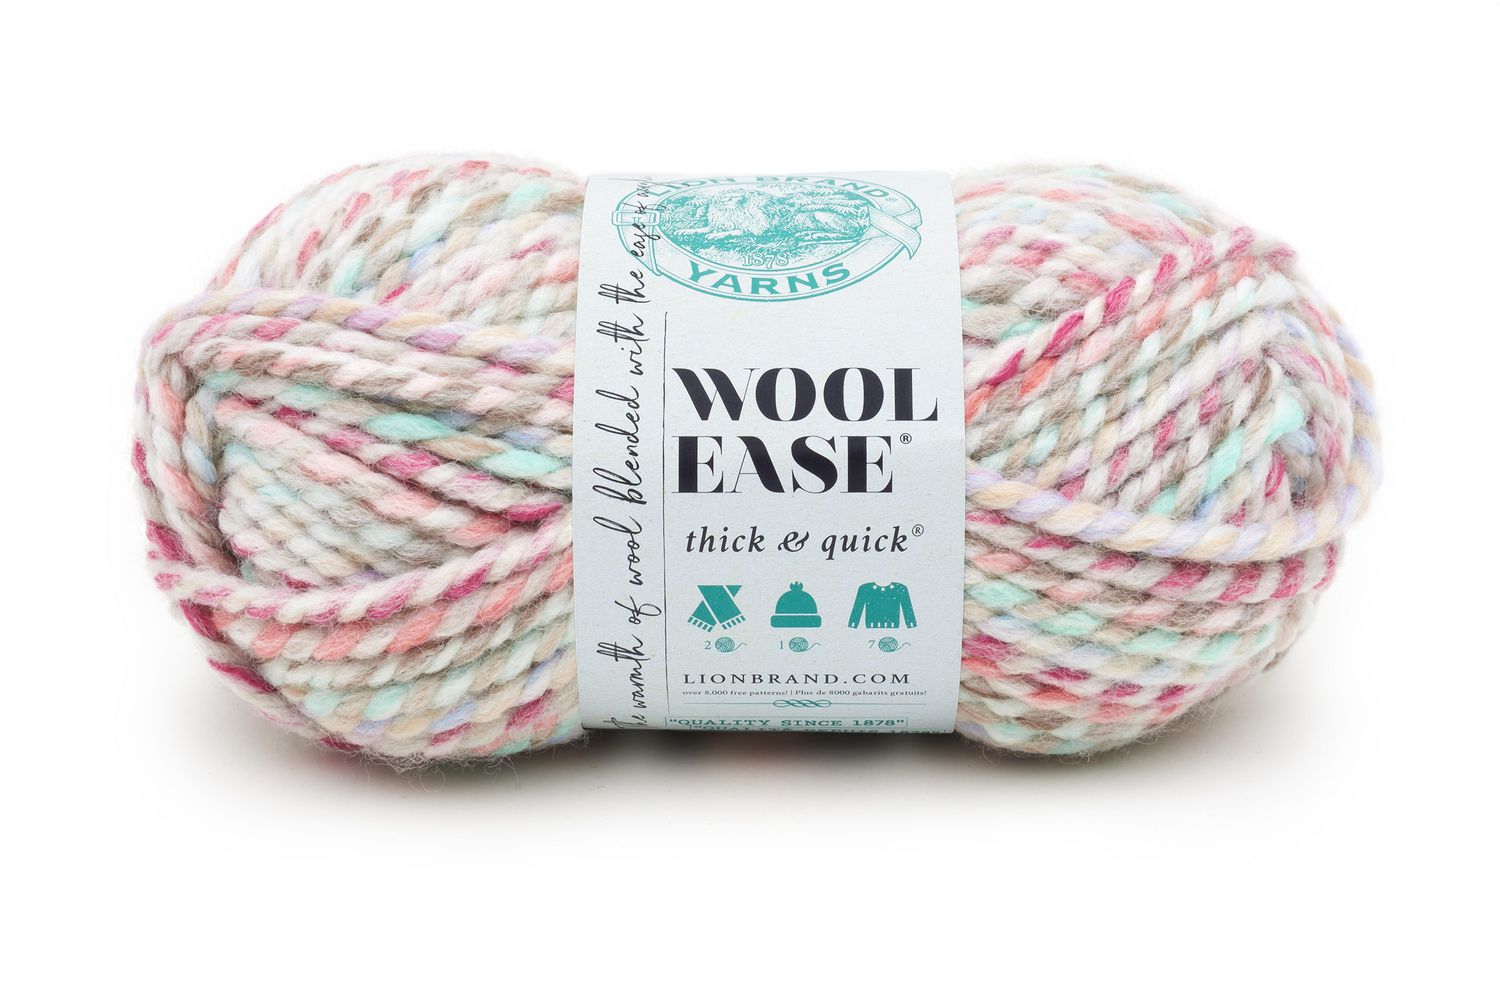 Carousel Wool-Ease Thick & Quick Yarn (6 - Super Bulky) by Lion Brand